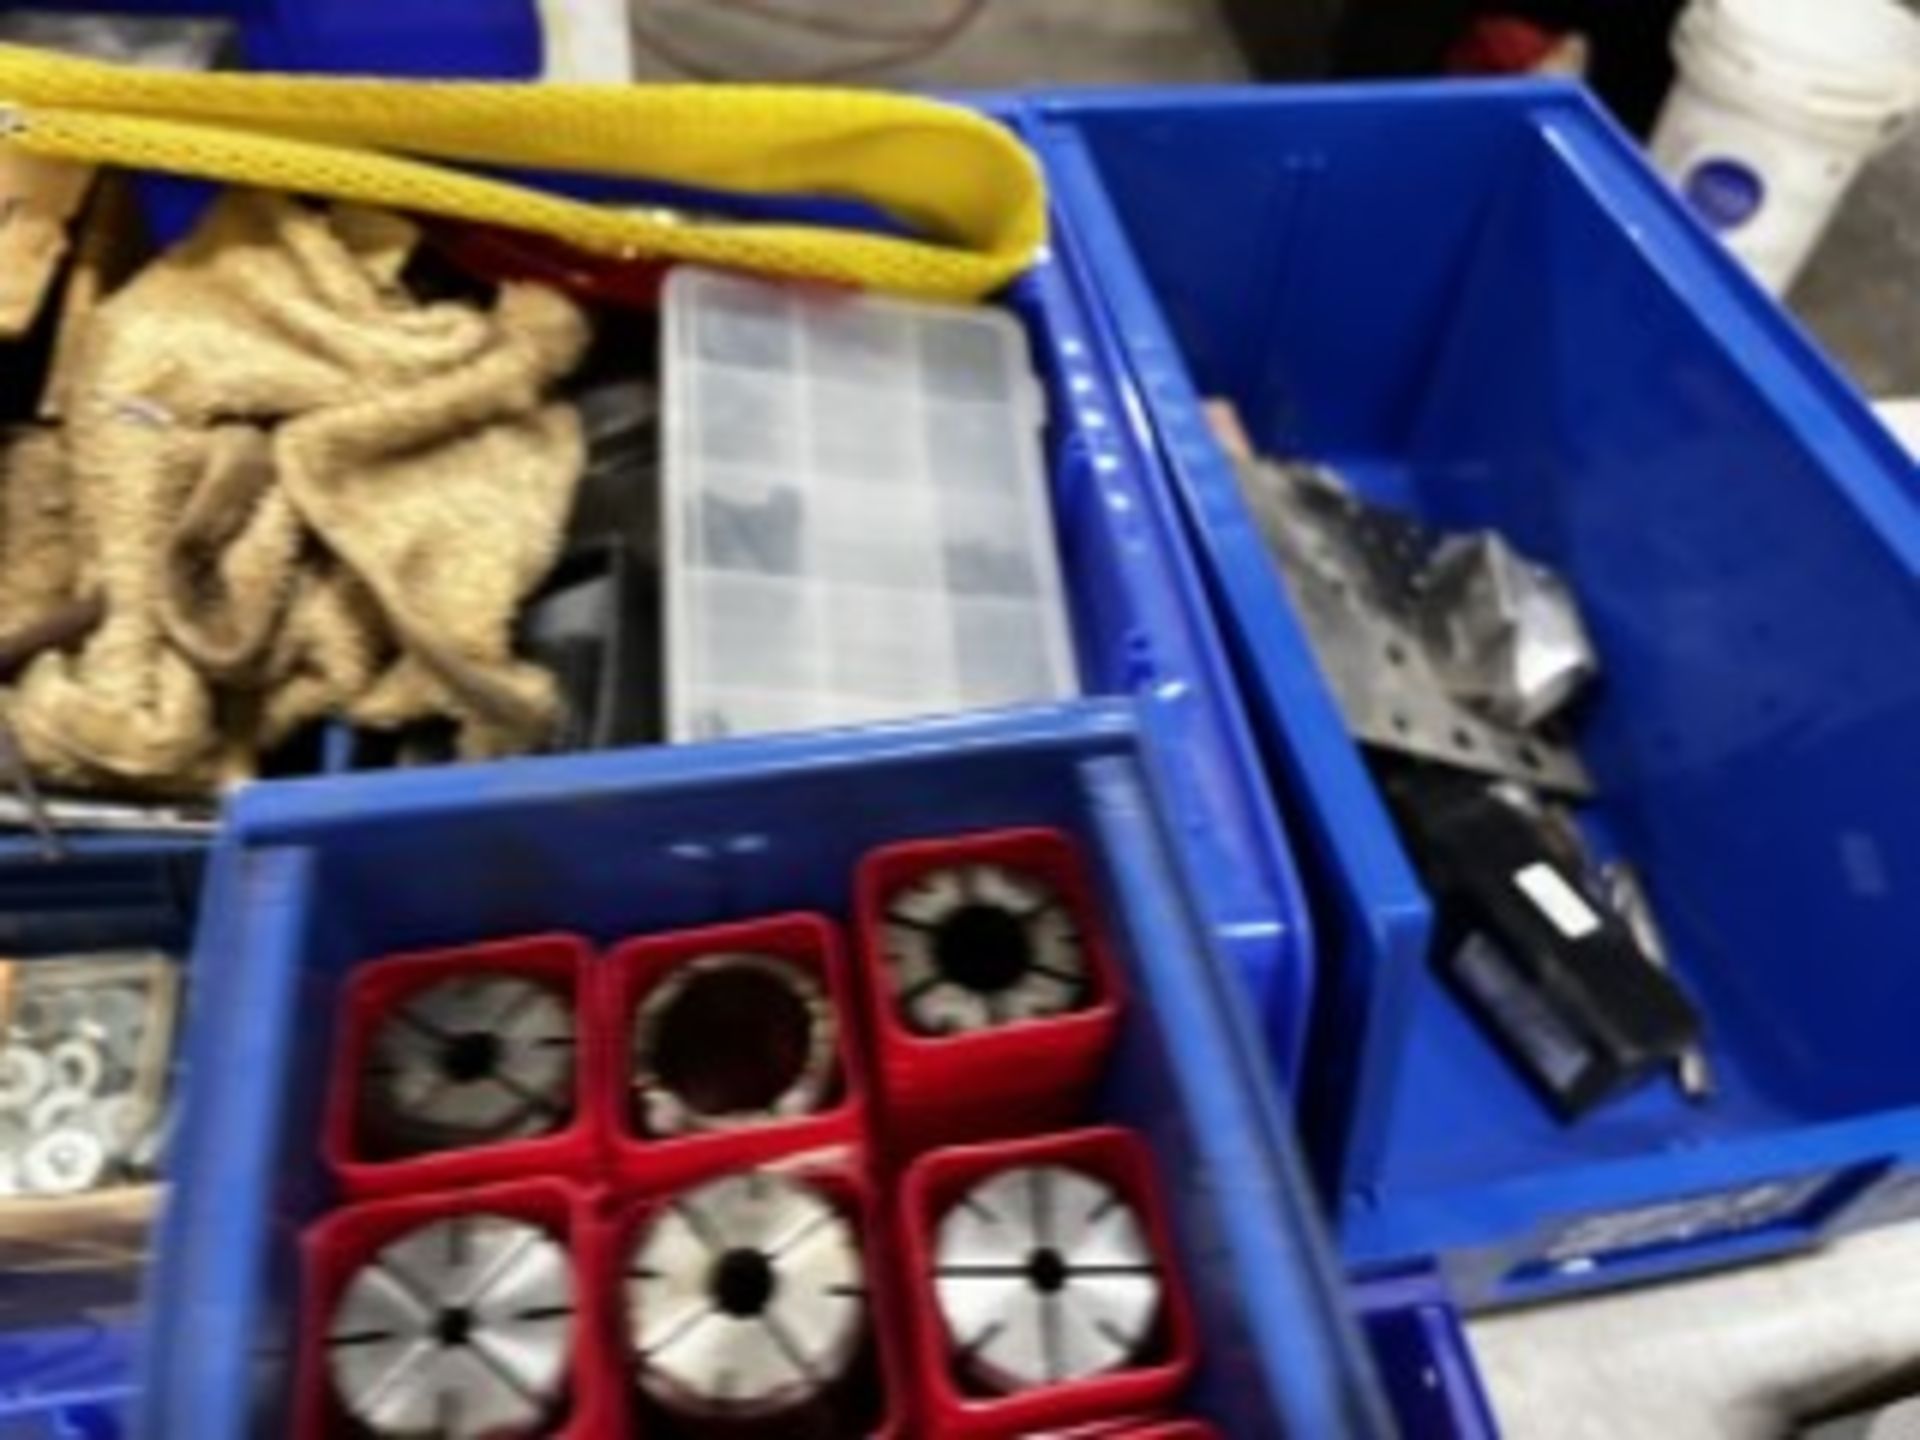 BOXES ASSORTED TOOLS, BOLTS, WASHERS, EXTRA LARGE DRILL BITS, ETC - Image 2 of 5